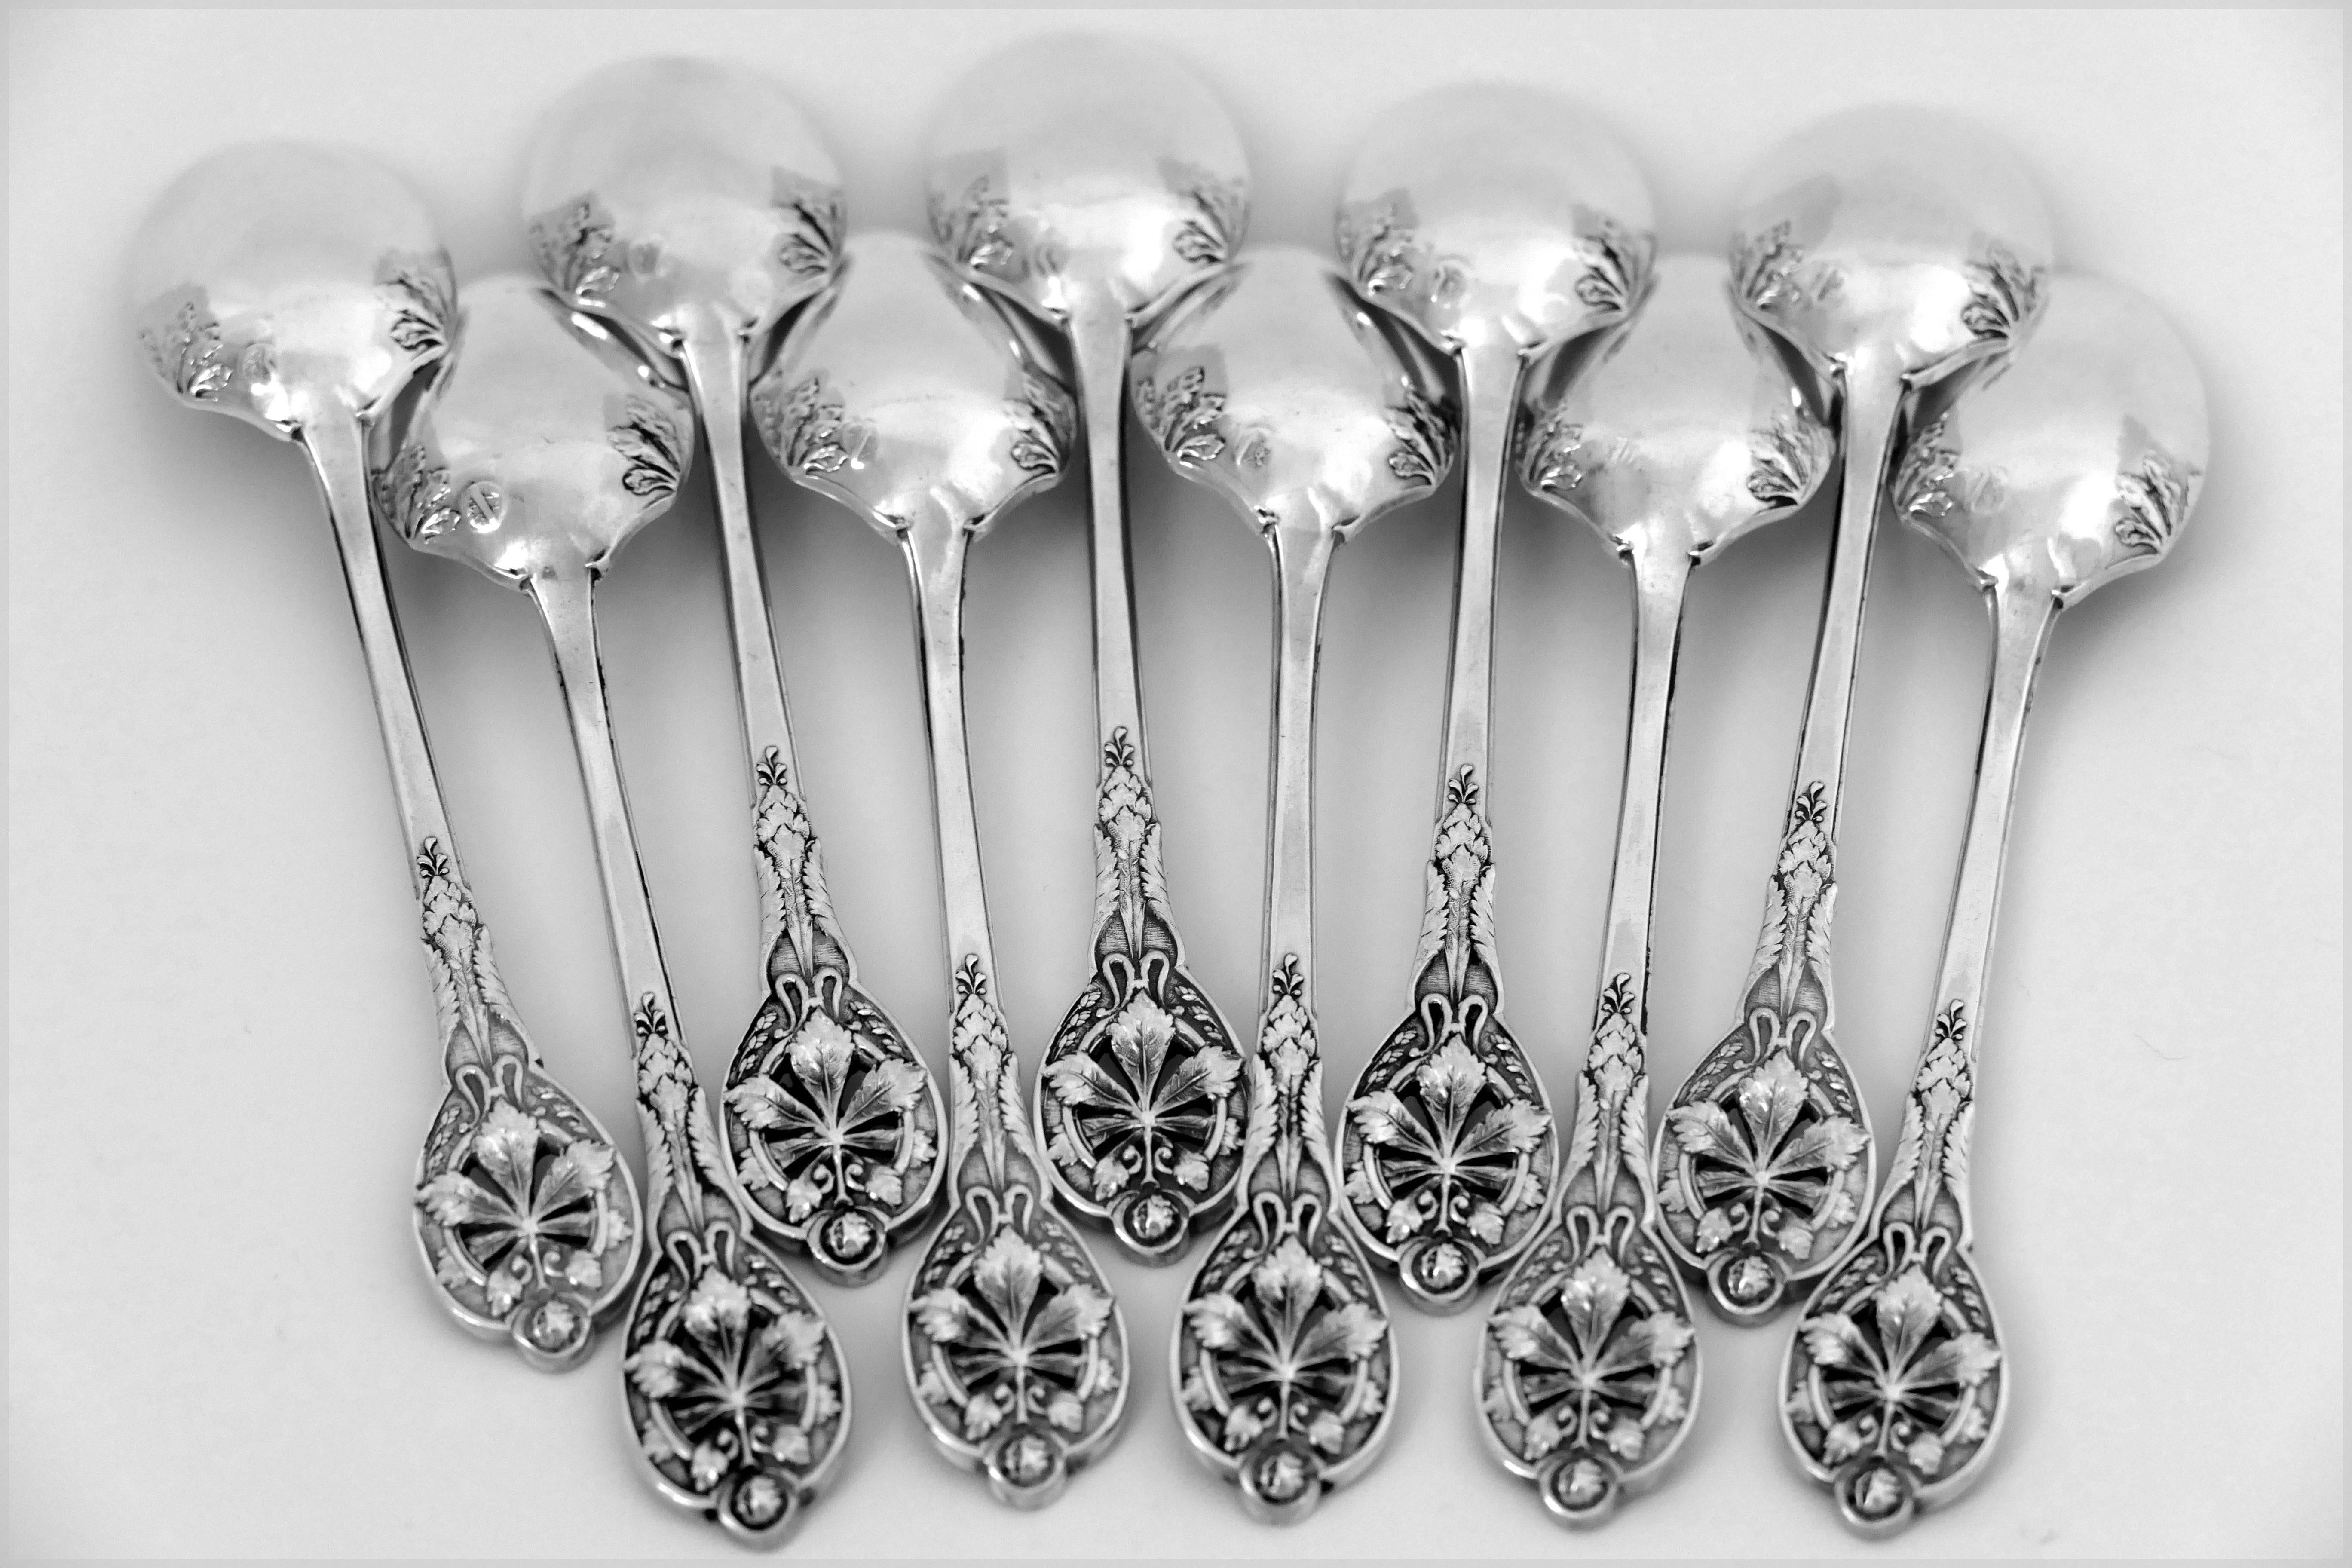 Henin Masterpiece French Sterling Silver Tea Coffee Spoons Set Chestnut Leaves 2